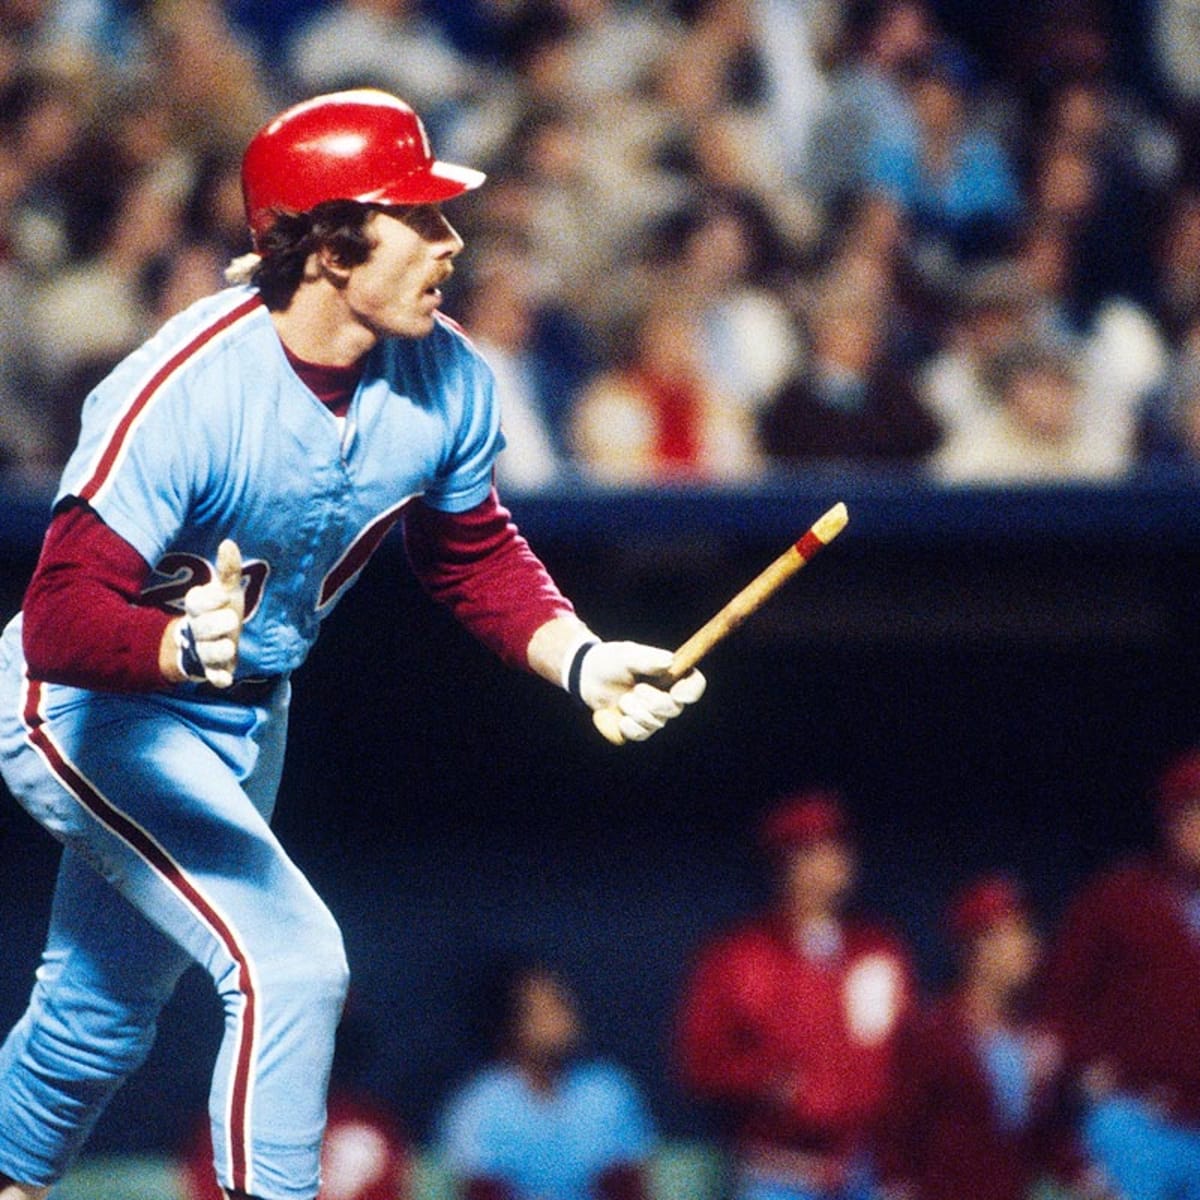 Tug McGraw strikes out Willie Wilson to close out 1980 World Series 